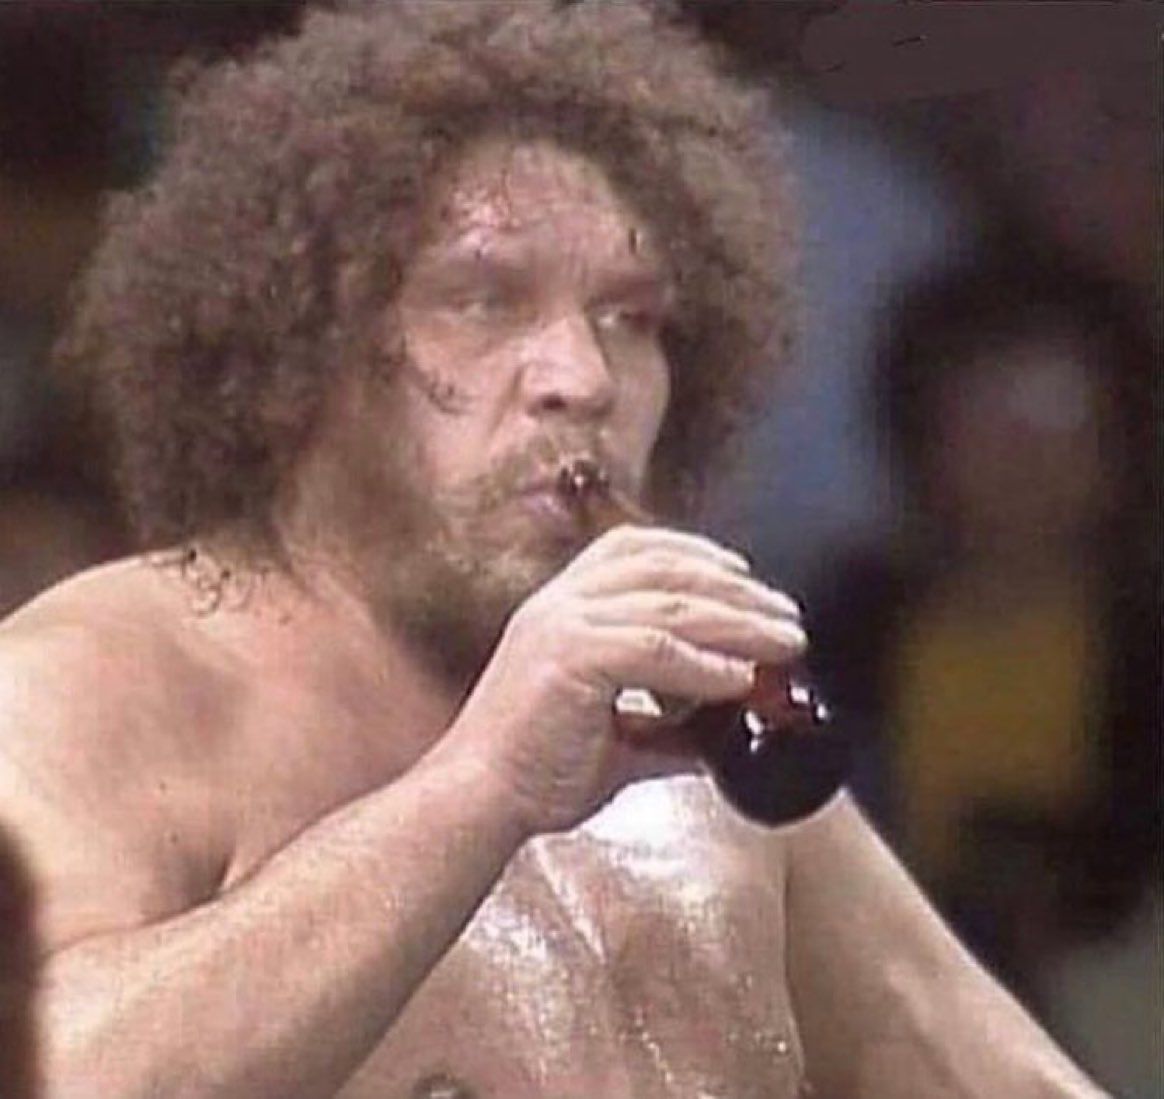 WWE: Andre the Giant once drank 108 beers in under an hour